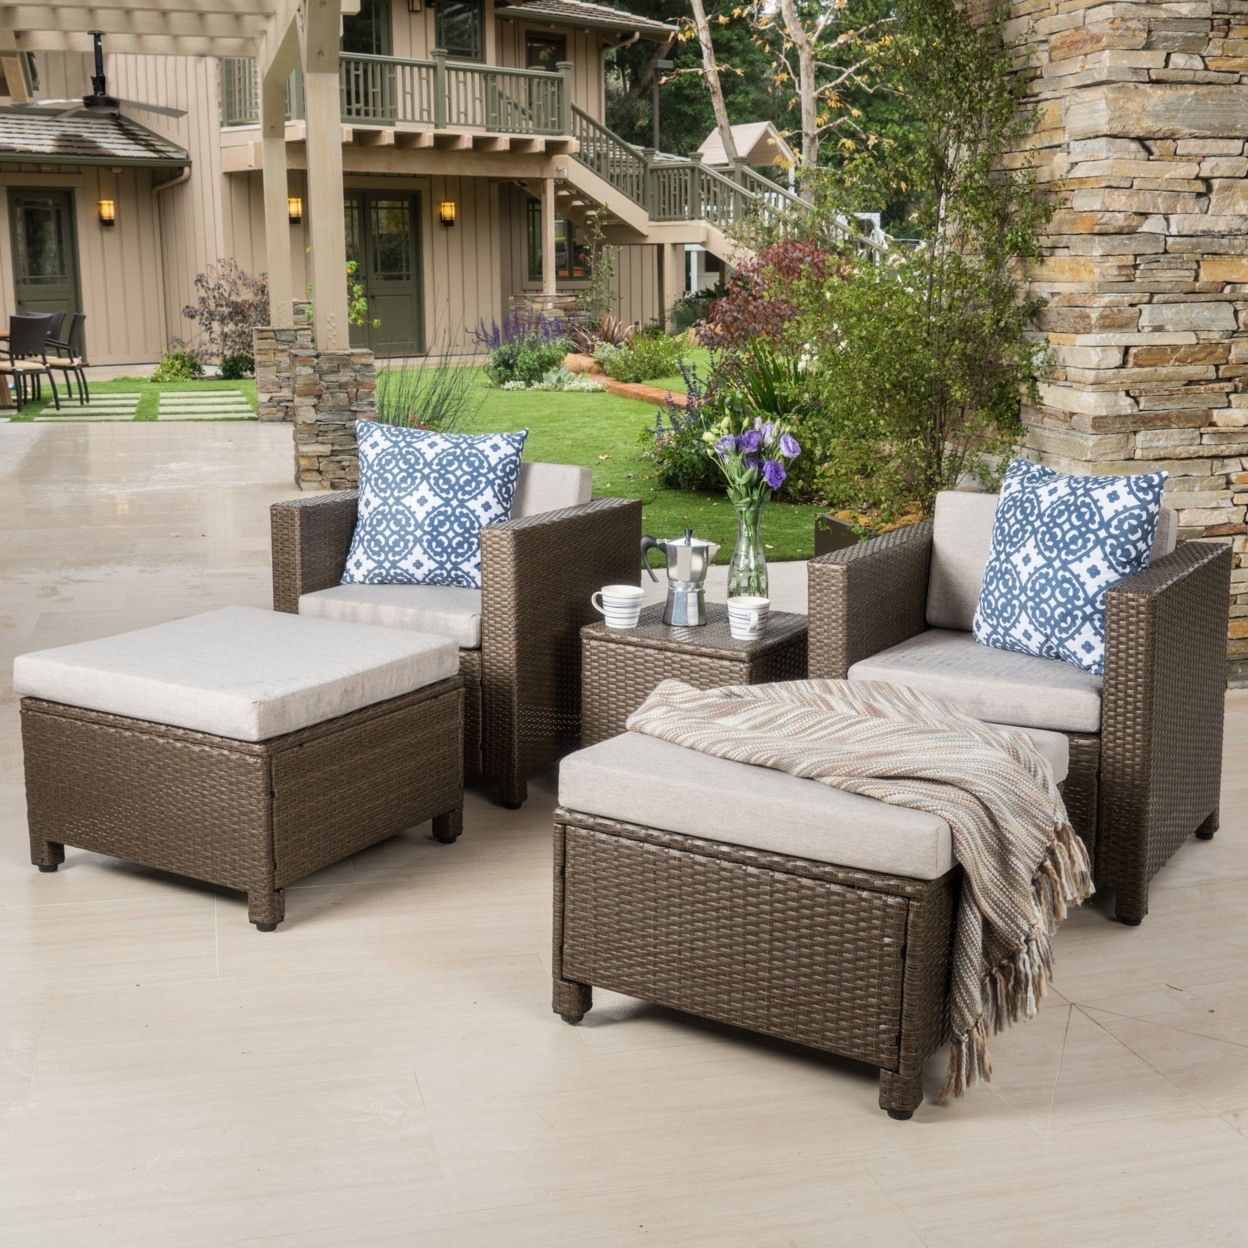 Budva Outdoor 5pc Chat Set With Cushions - Black/Gray Wicker